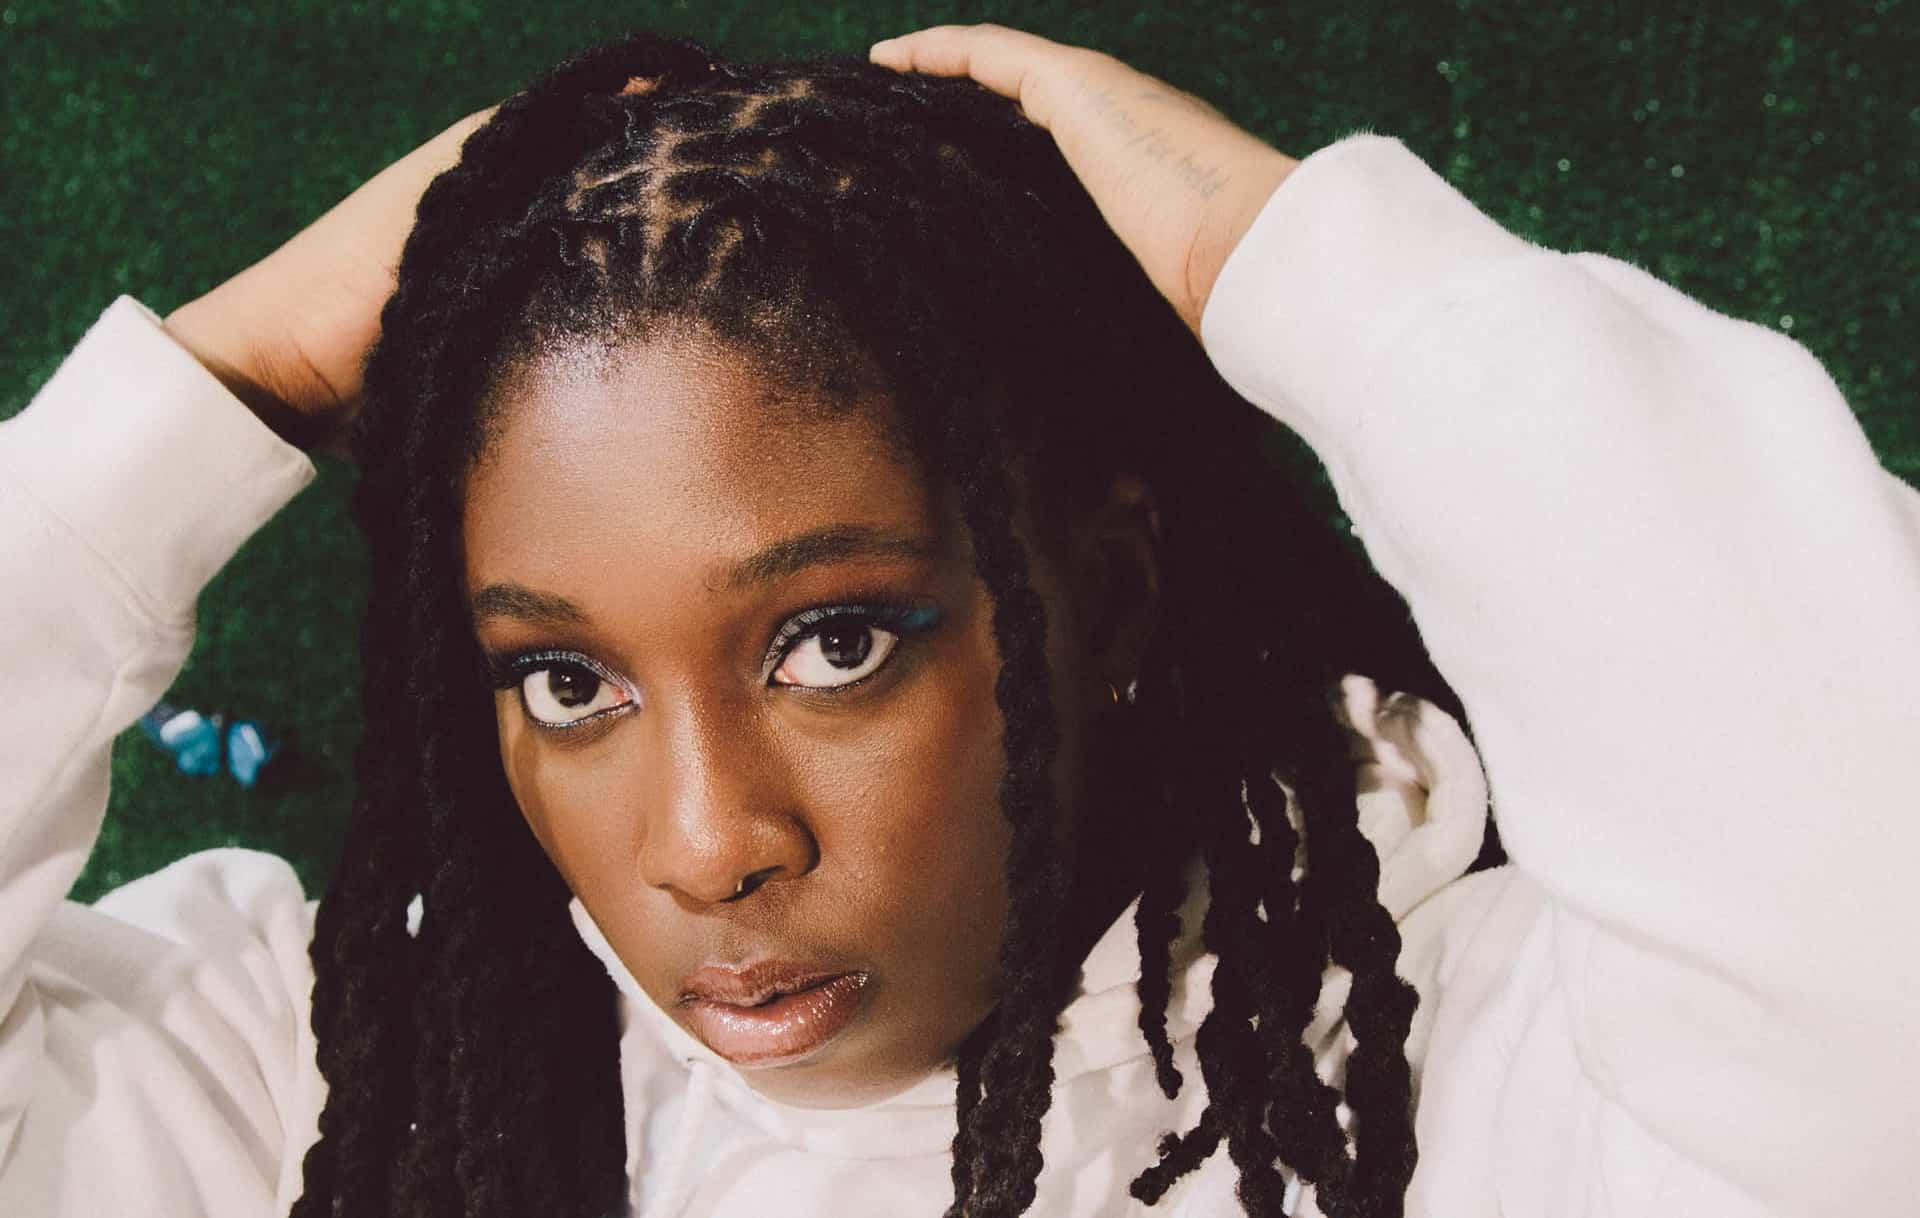 Ivy Sole, an acclaimed rapper-singer and rare hybrid of sultry and soulful R&B paired with hip-hop lyricism, will perform at Mass MoCA